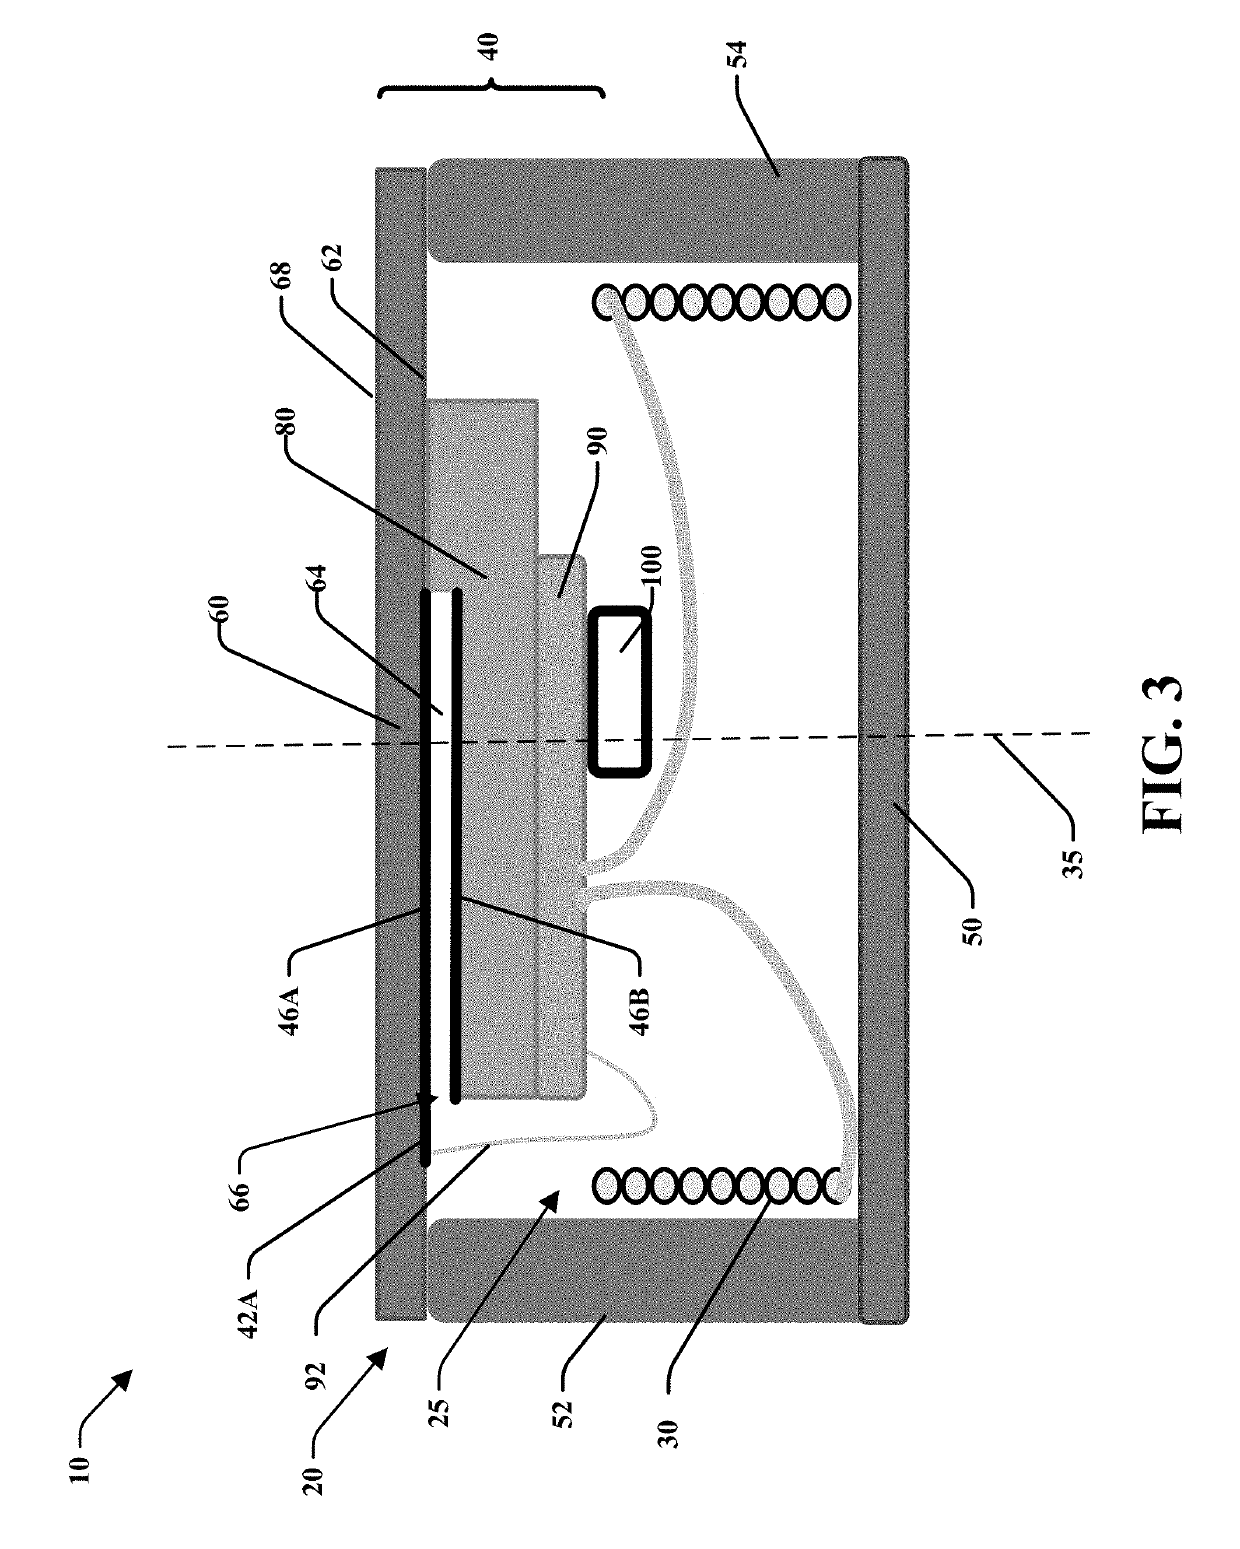 MEMS device for an implant assembly